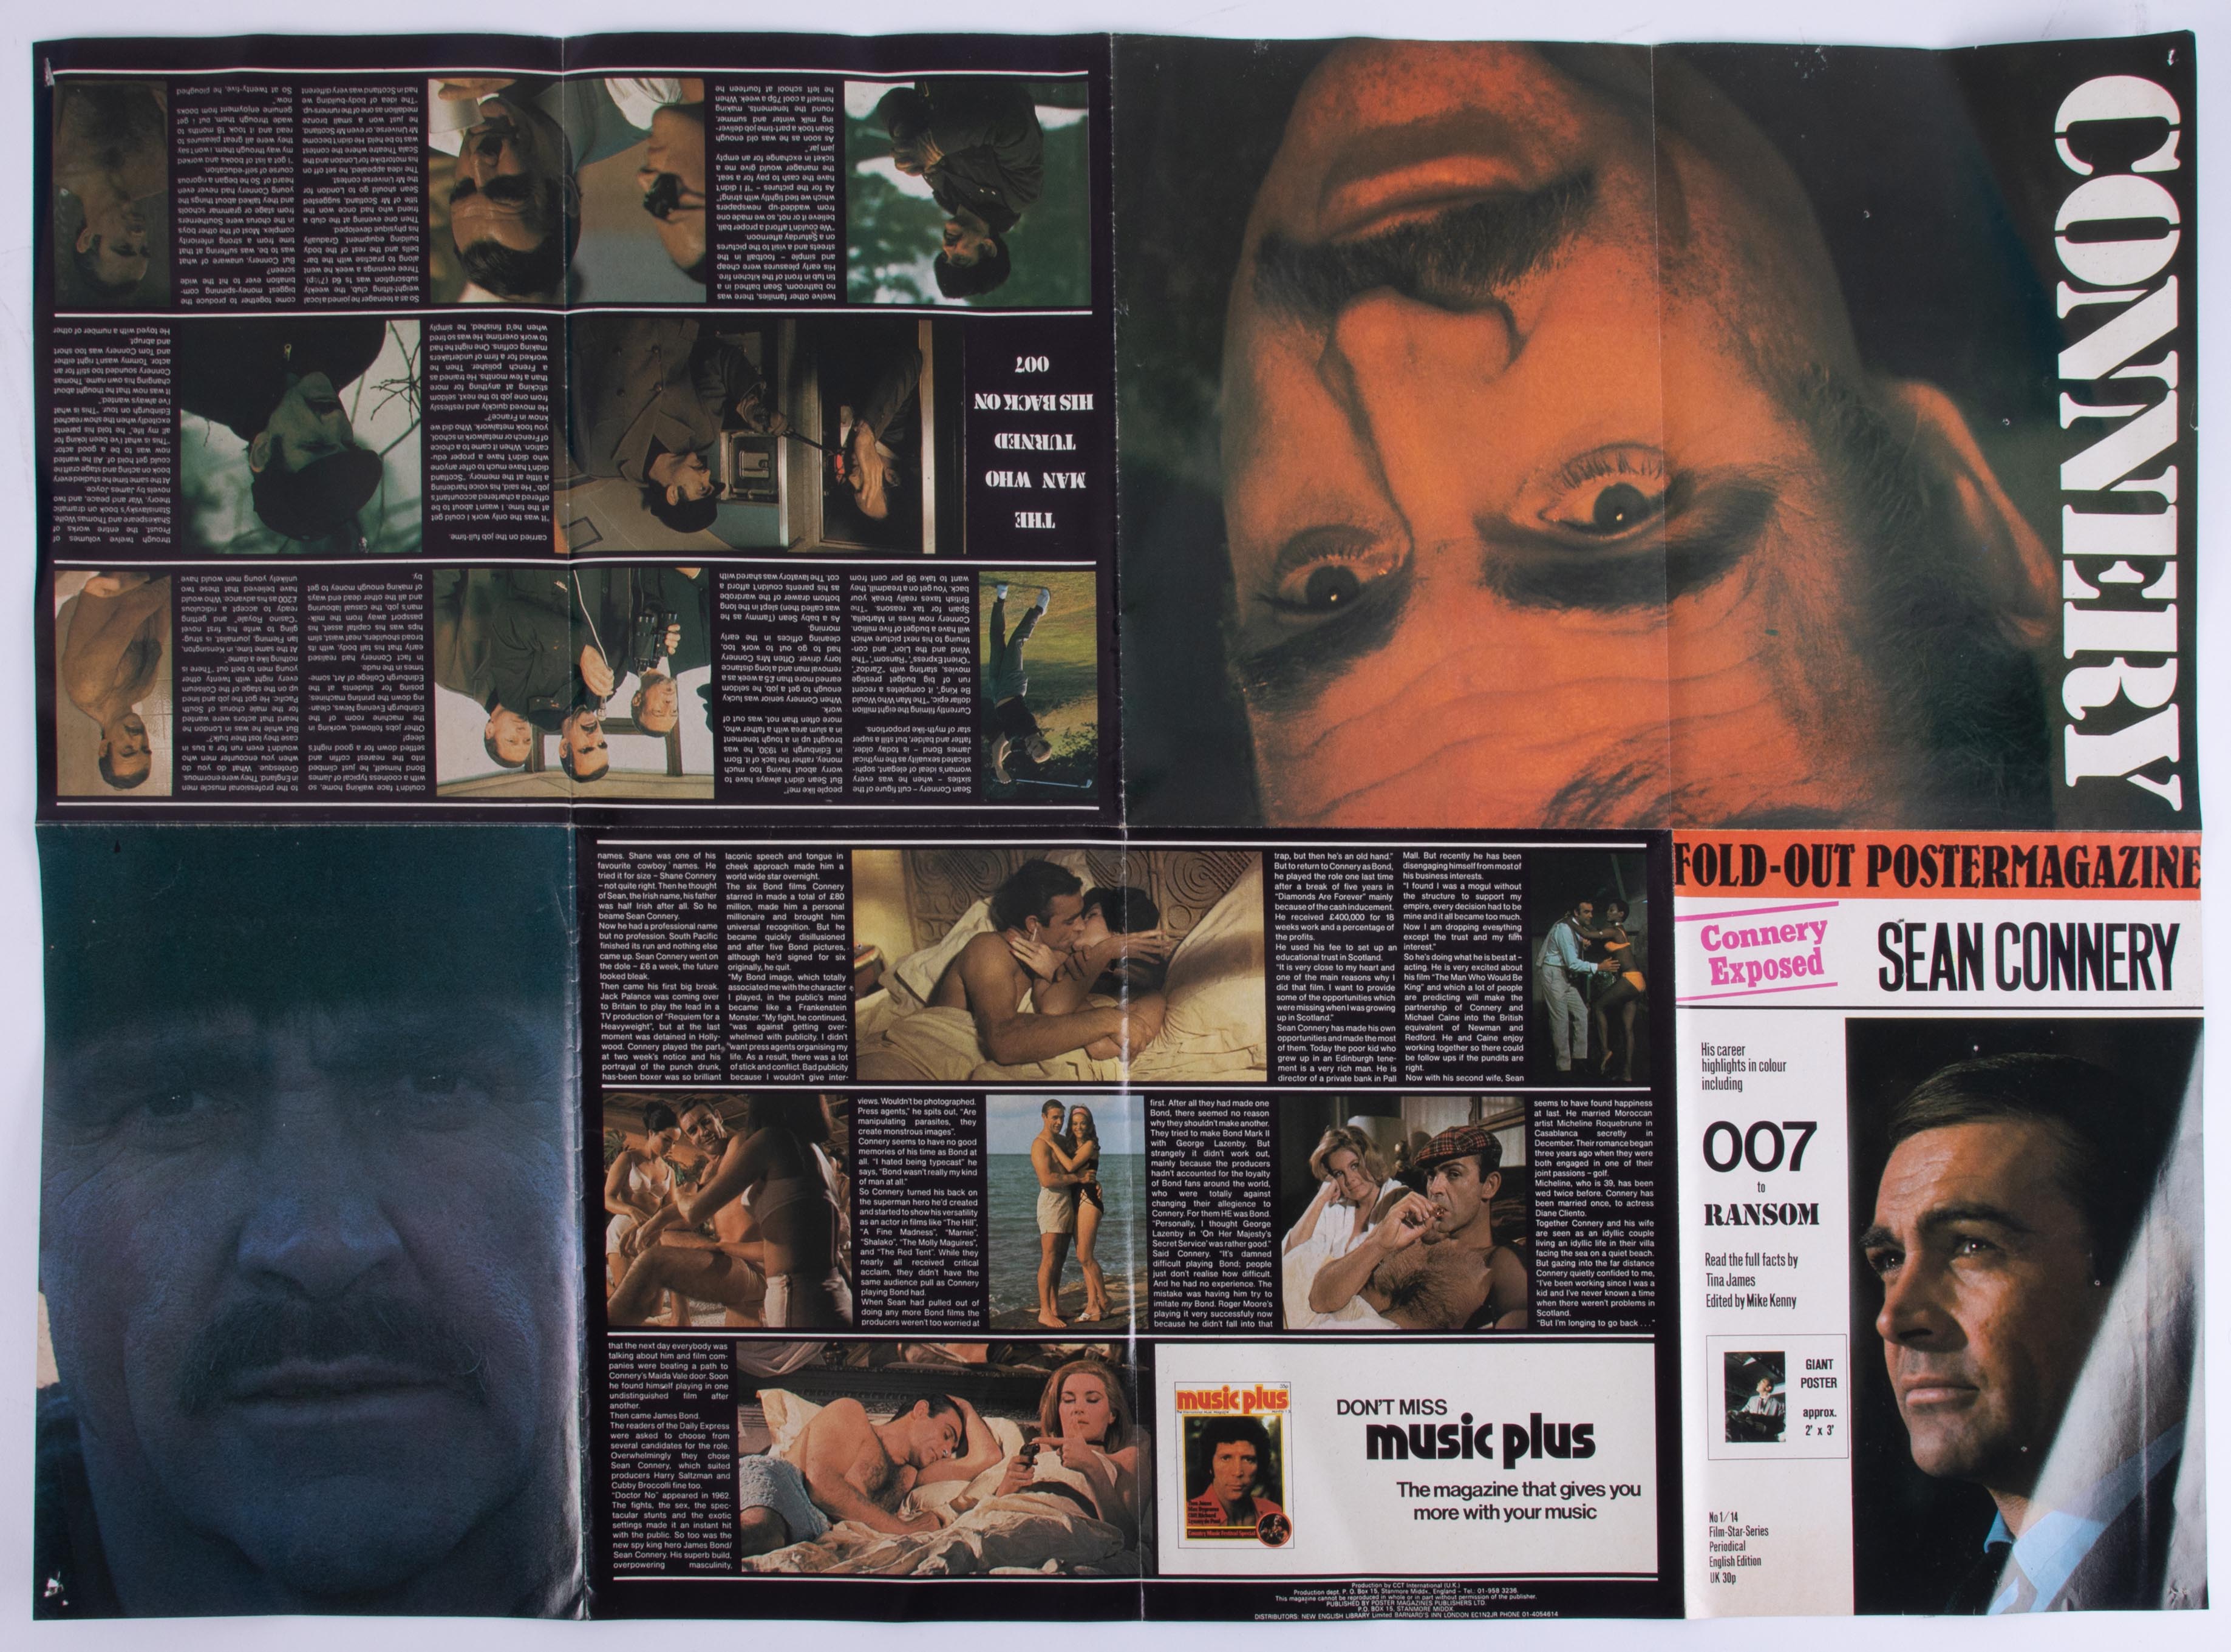 James Bond 007, View To A Kill, Smiths crisps poster 007, together with fold out poster magazine, - Image 3 of 5